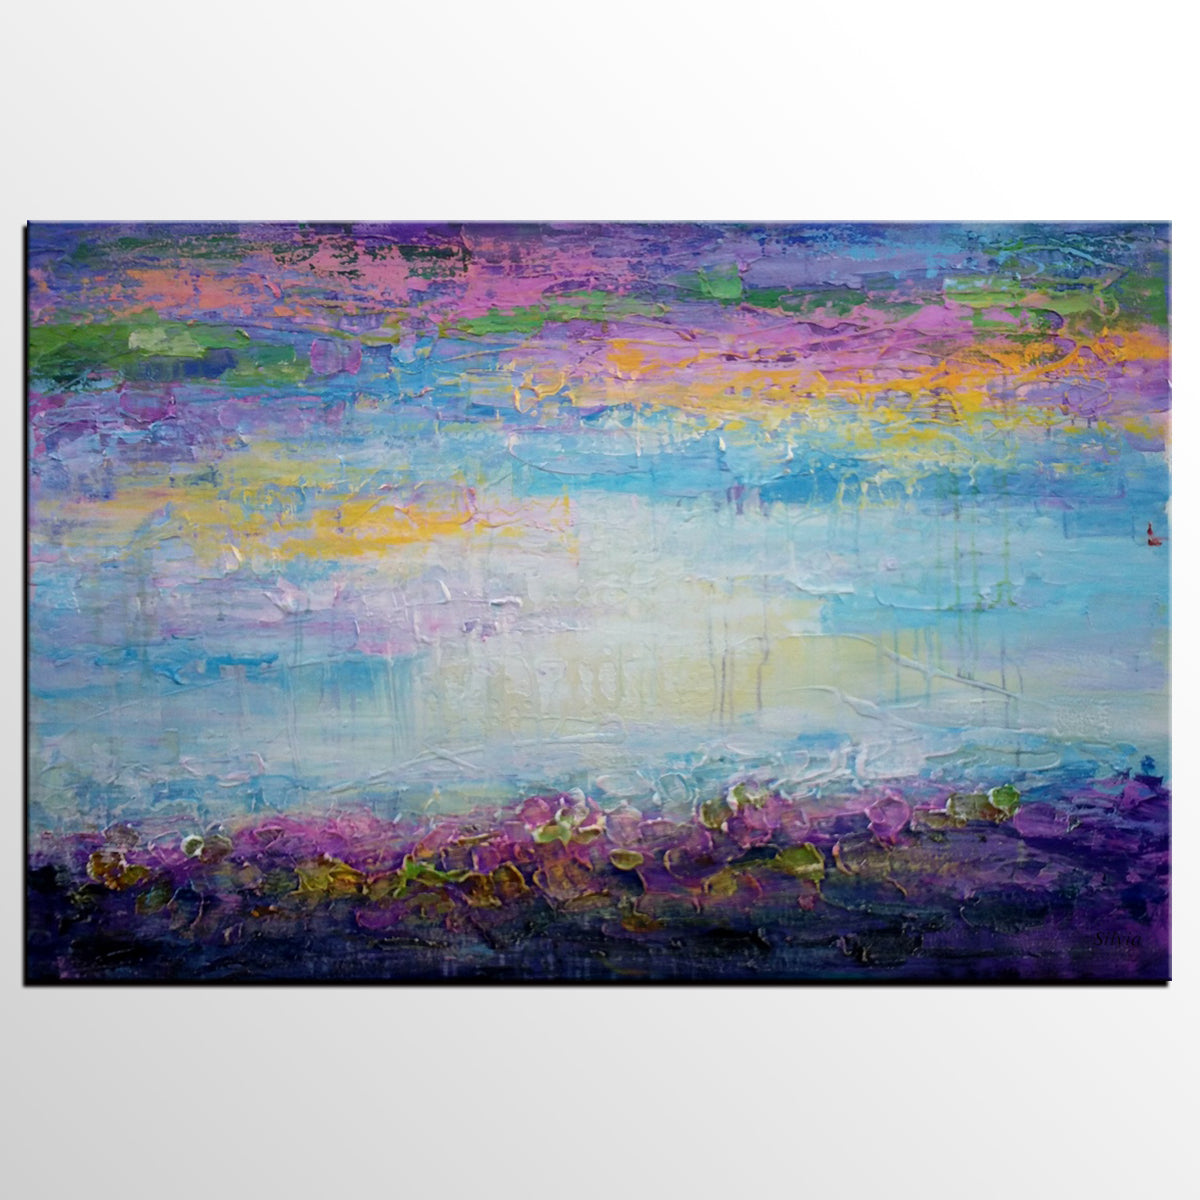 Large Painting, Canvas Art, Framed Art, Abstract Landscape Painting, Original Art, Canvas Oil Painting, Abstract Art, Large Art, Wall Art-Art Painting Canvas